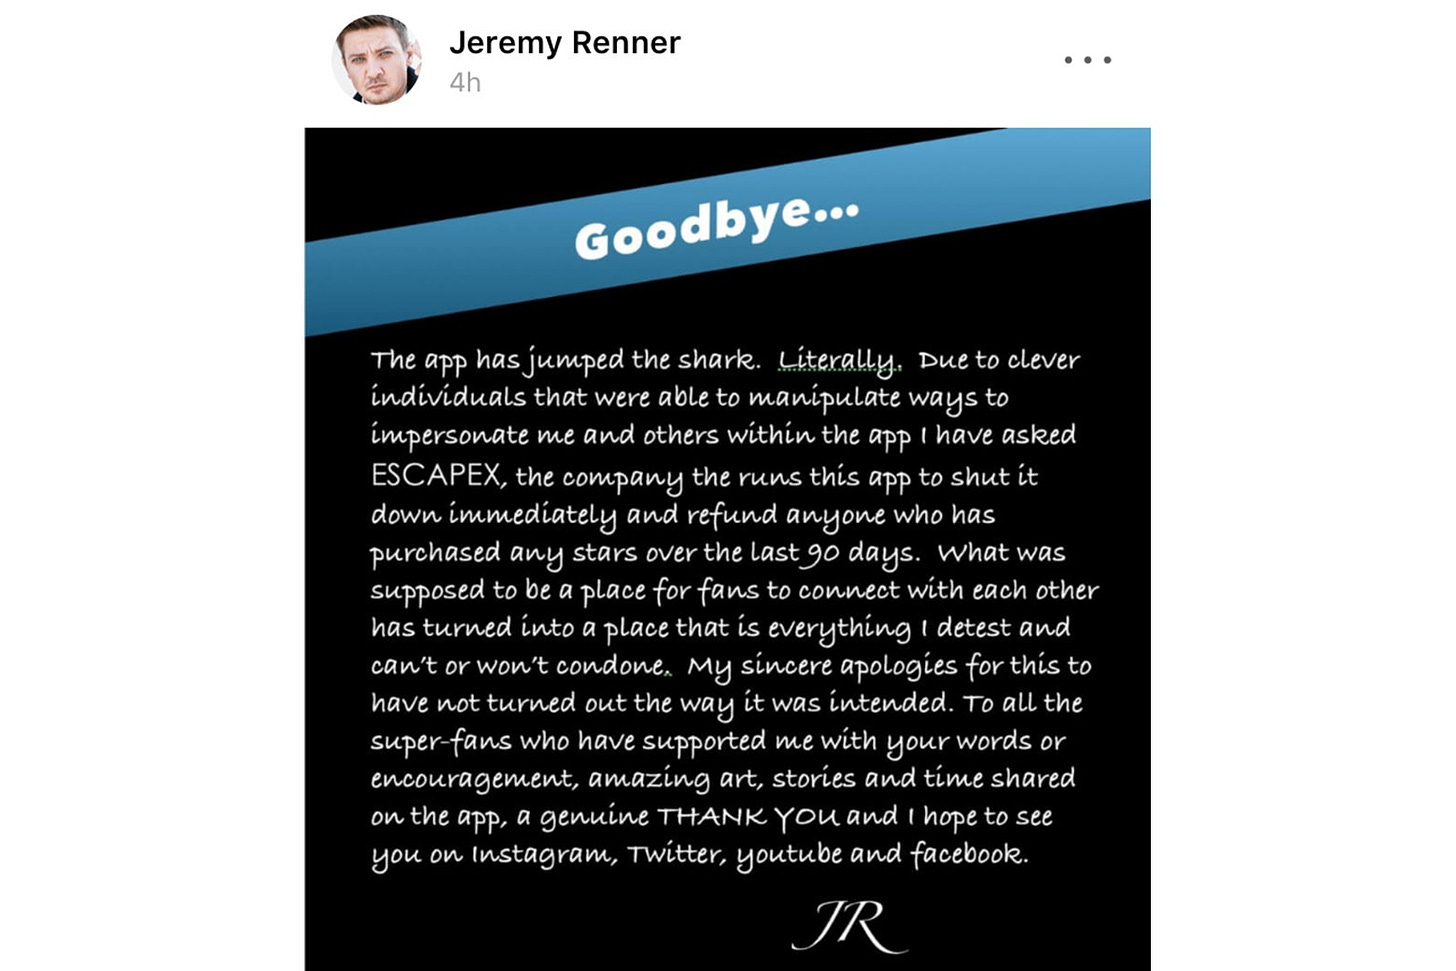 Jeremy Renner has shut down his official app after it was overrun by trolls.